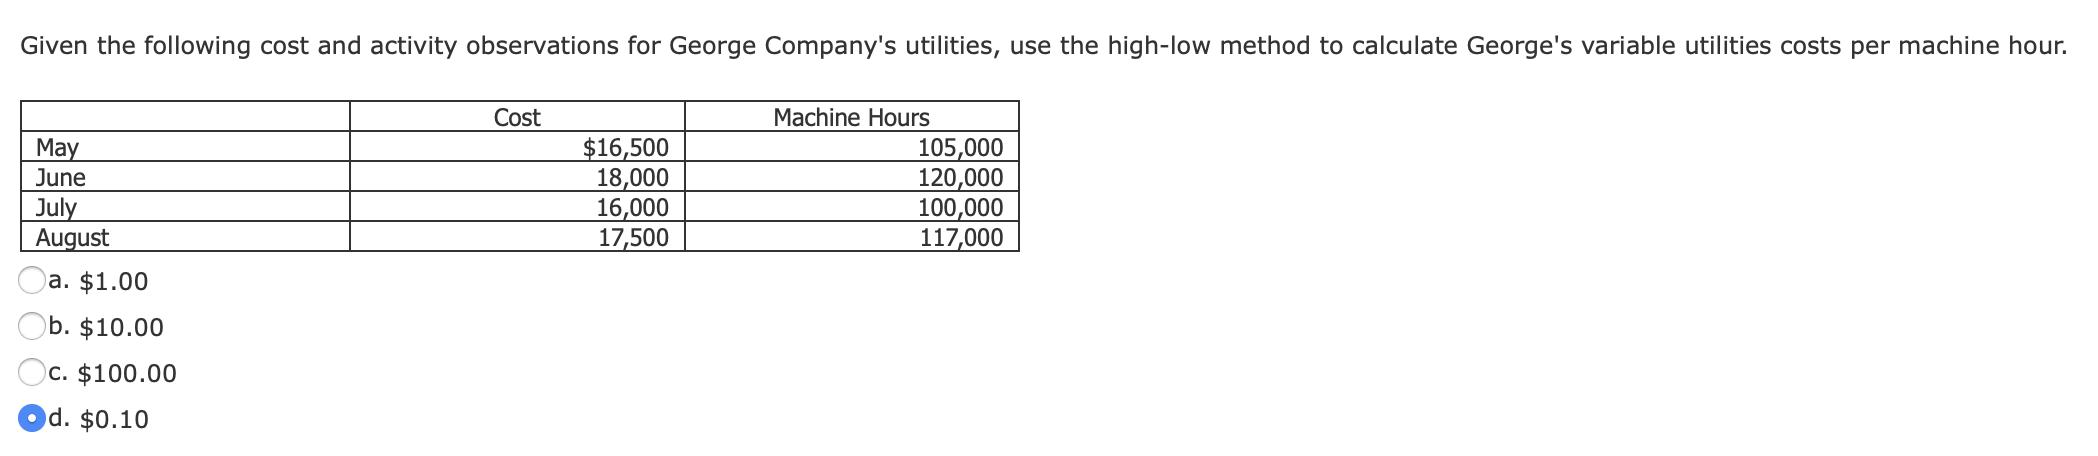 Given the following cost and activity observations for George Companys utilities, use the high-low method to calculate Georg